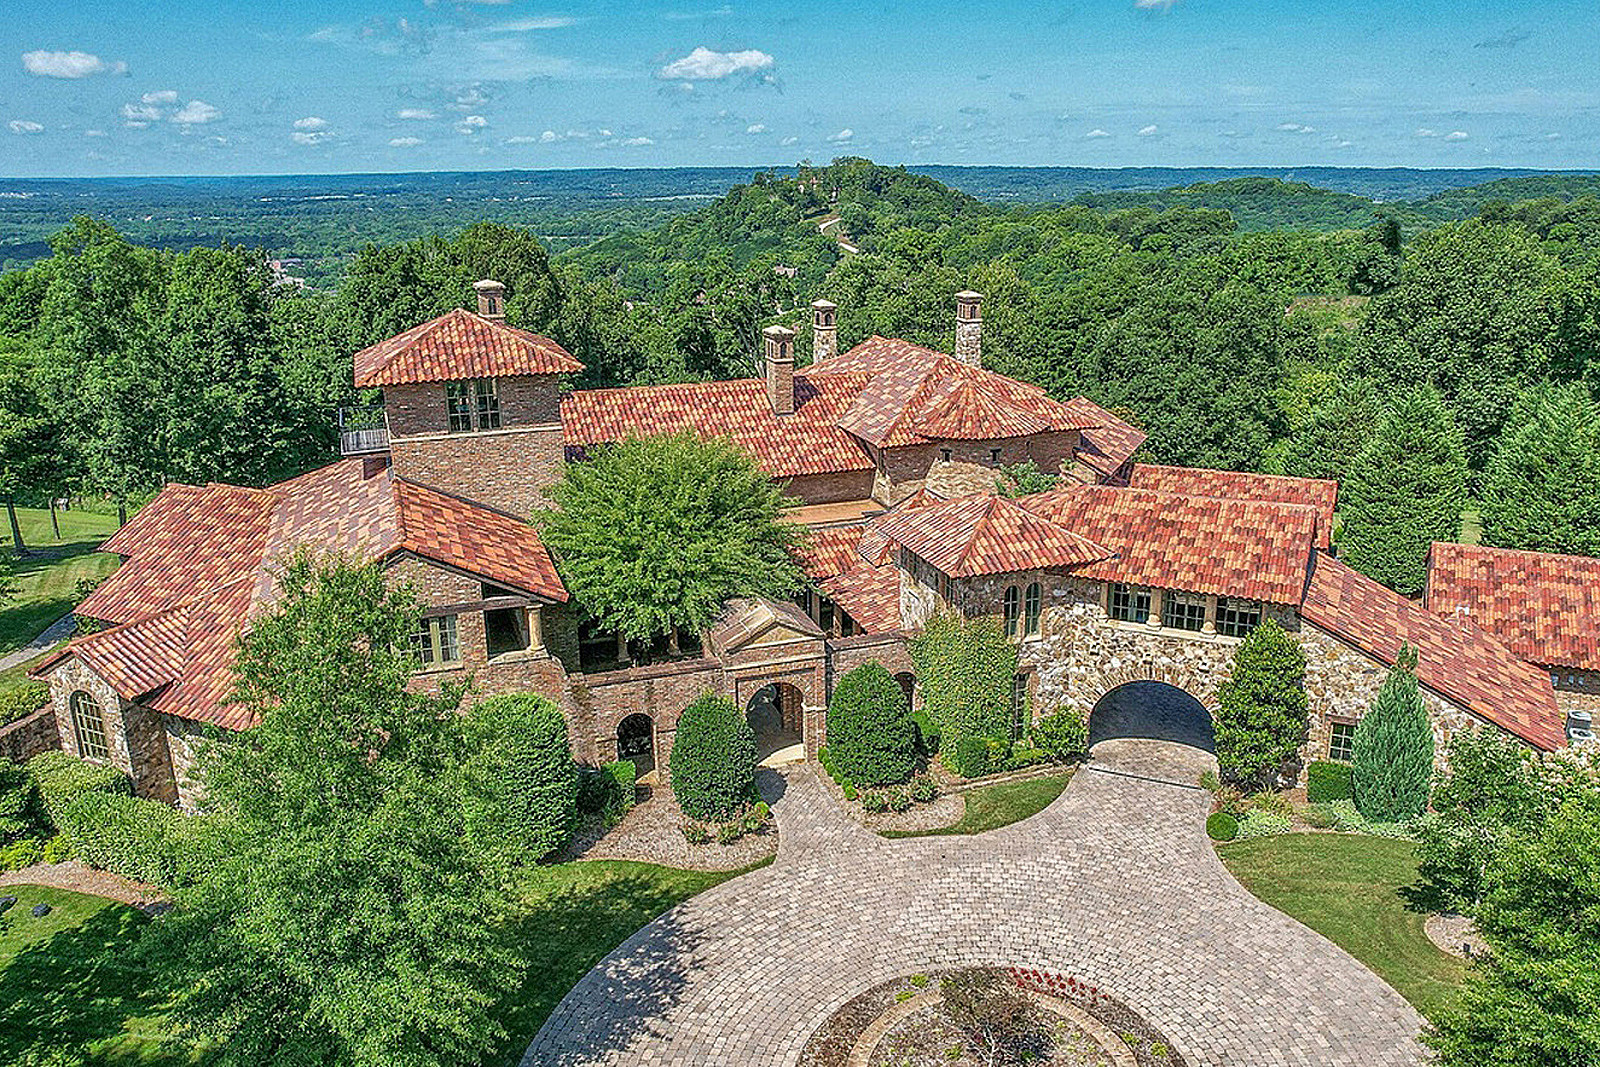 See Inside the 11 Most Jaw-Dropping Country Stars' Mansions